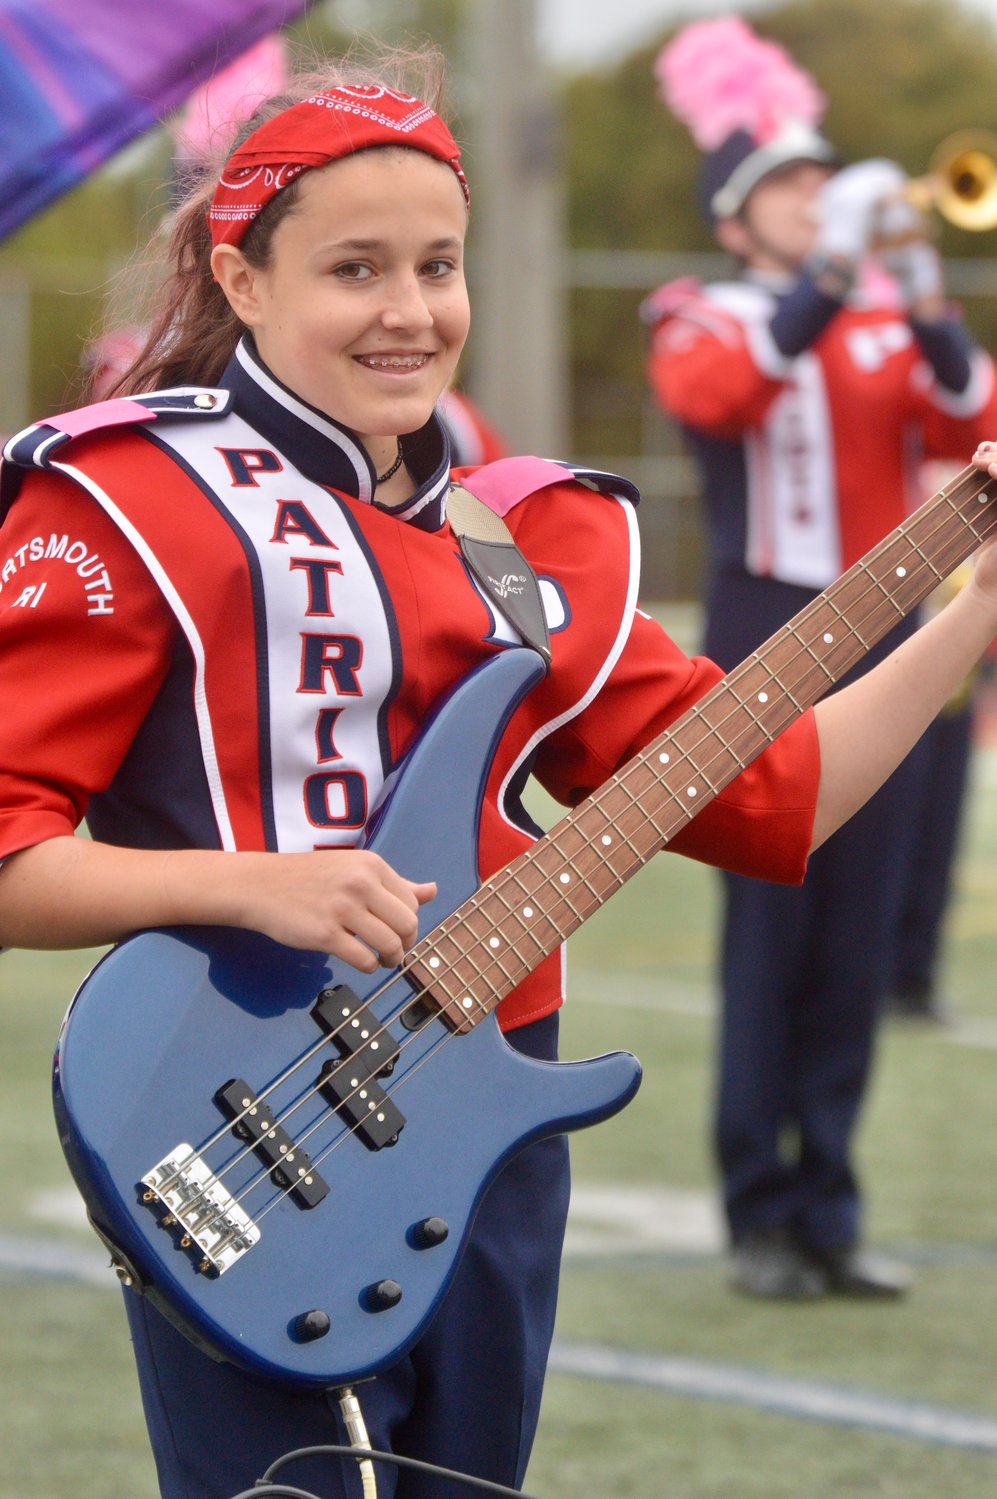 Anabella Barber plays electric bass as she accompanies the PHS Marching Band, which played well-known rock and roll songs from the ’80s and ’90s.